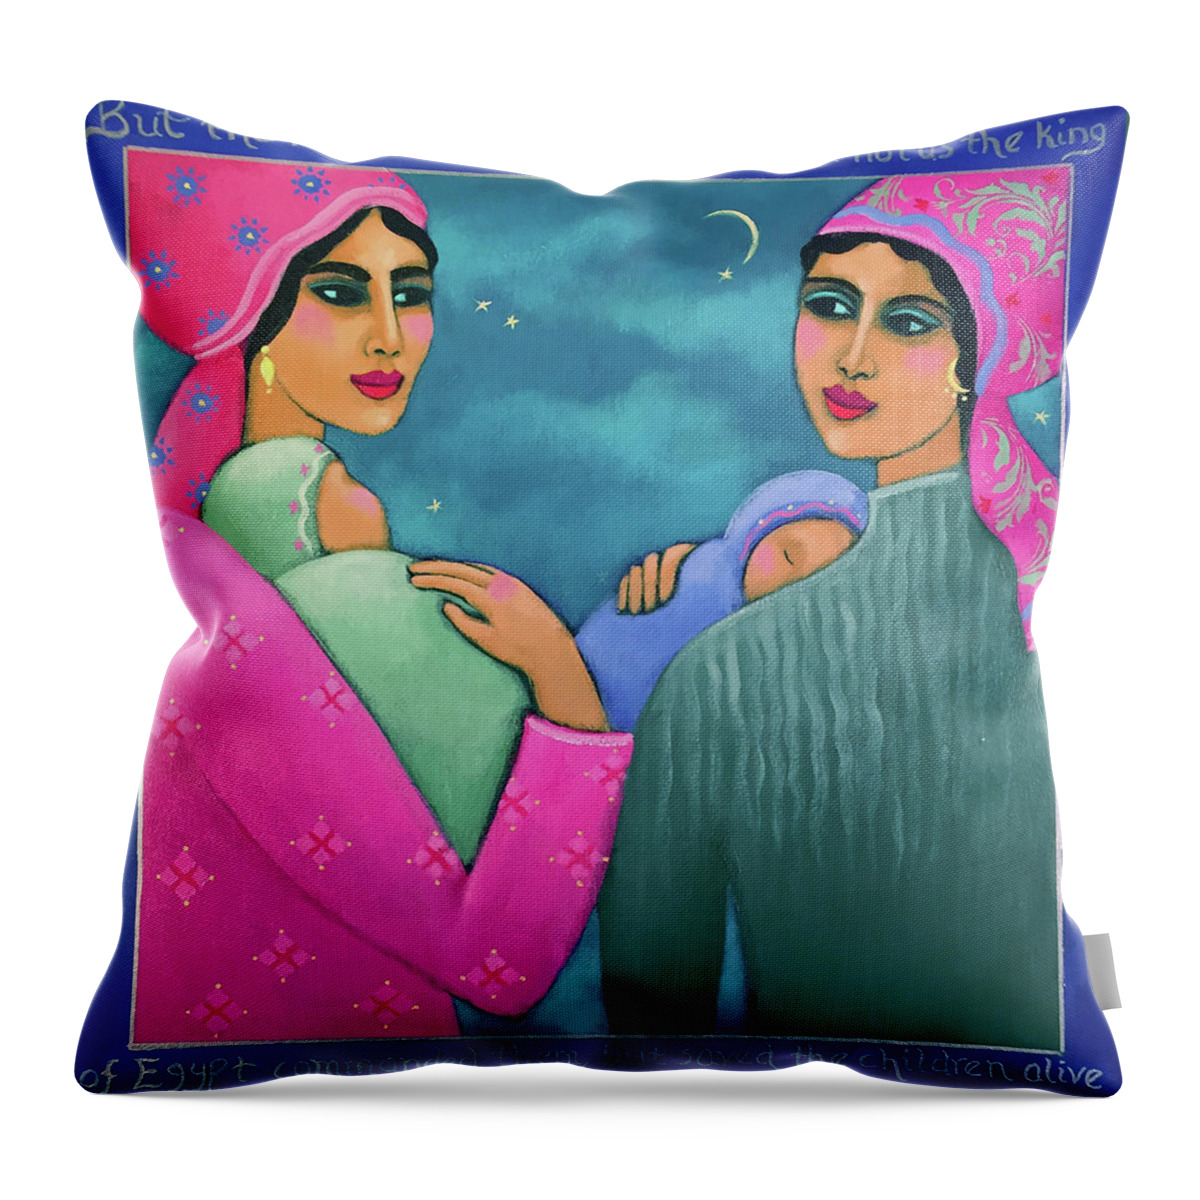 Midwives Throw Pillow featuring the painting The Midwives by Carla Golembe